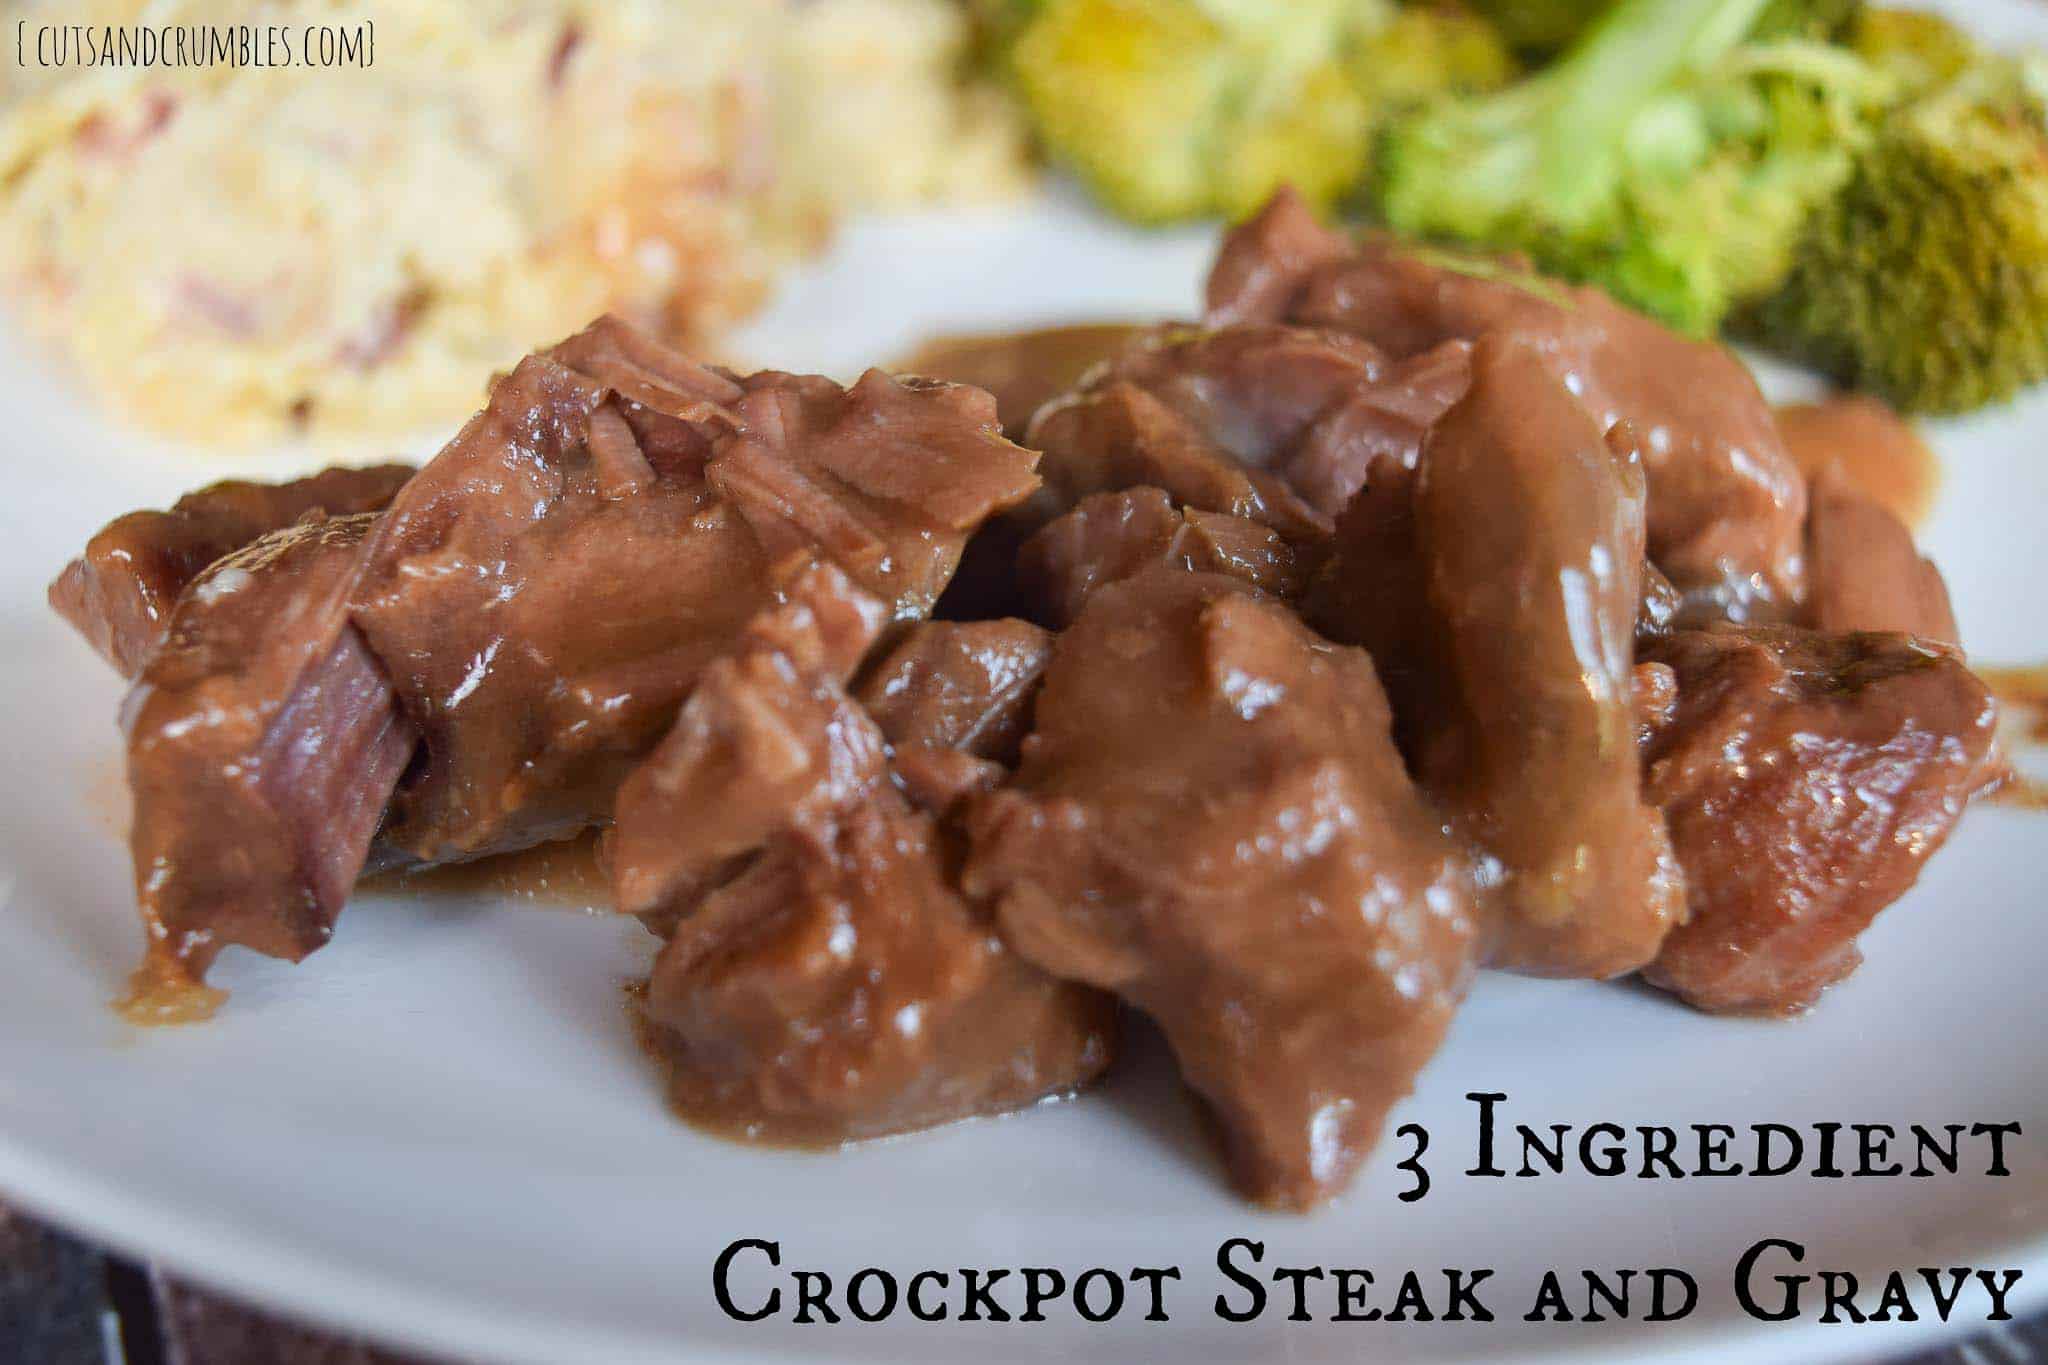 3 Ingredient Crock Pot Steak close up view with title 